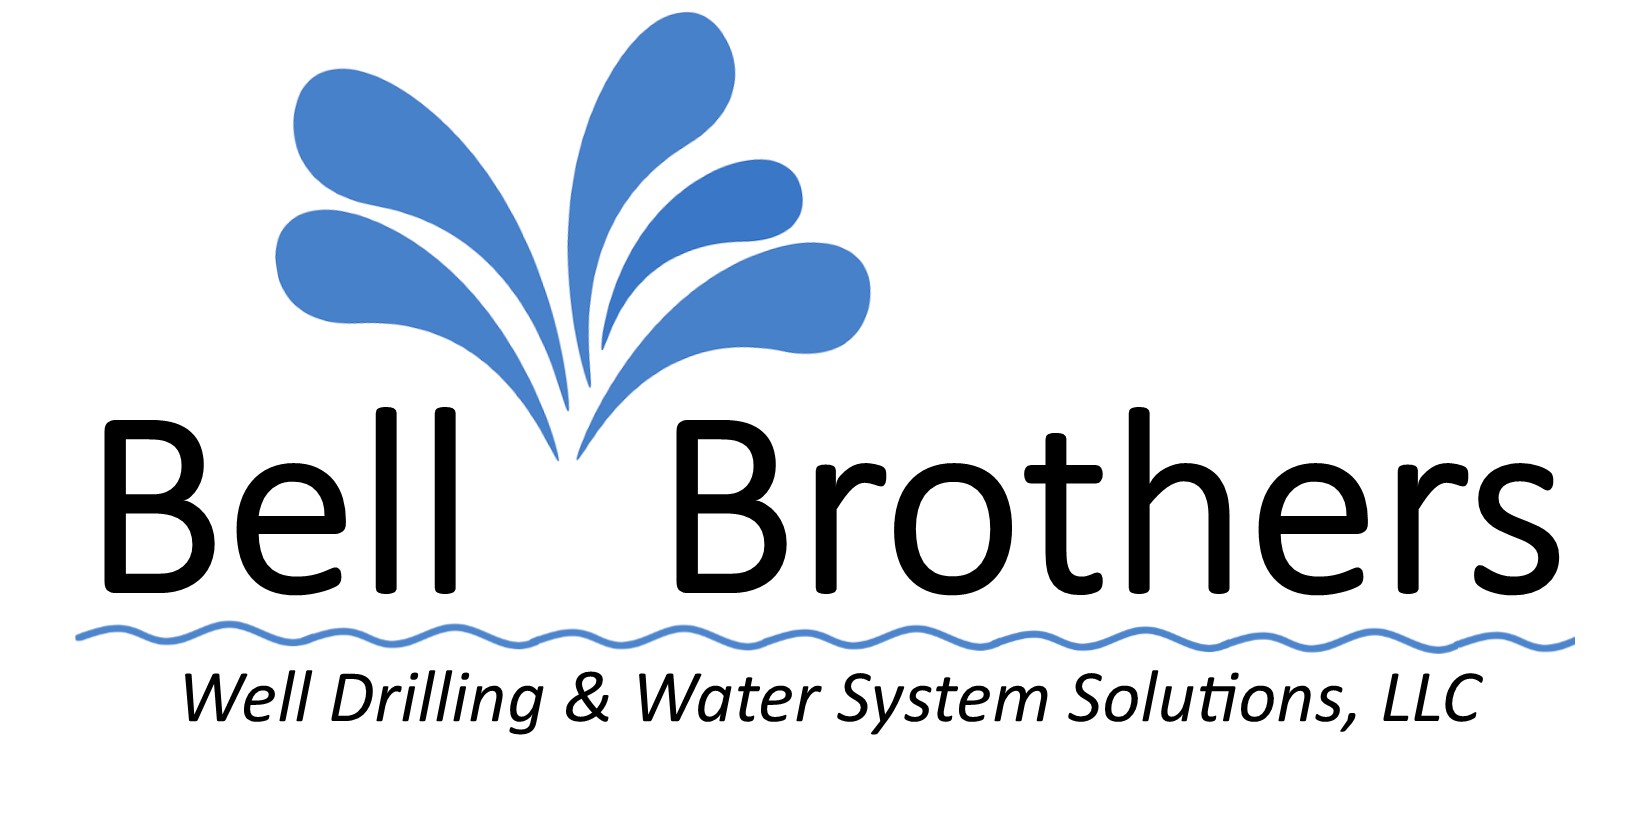 Bell Brothers Well Drilling & Water System Solutions, LLC Logo